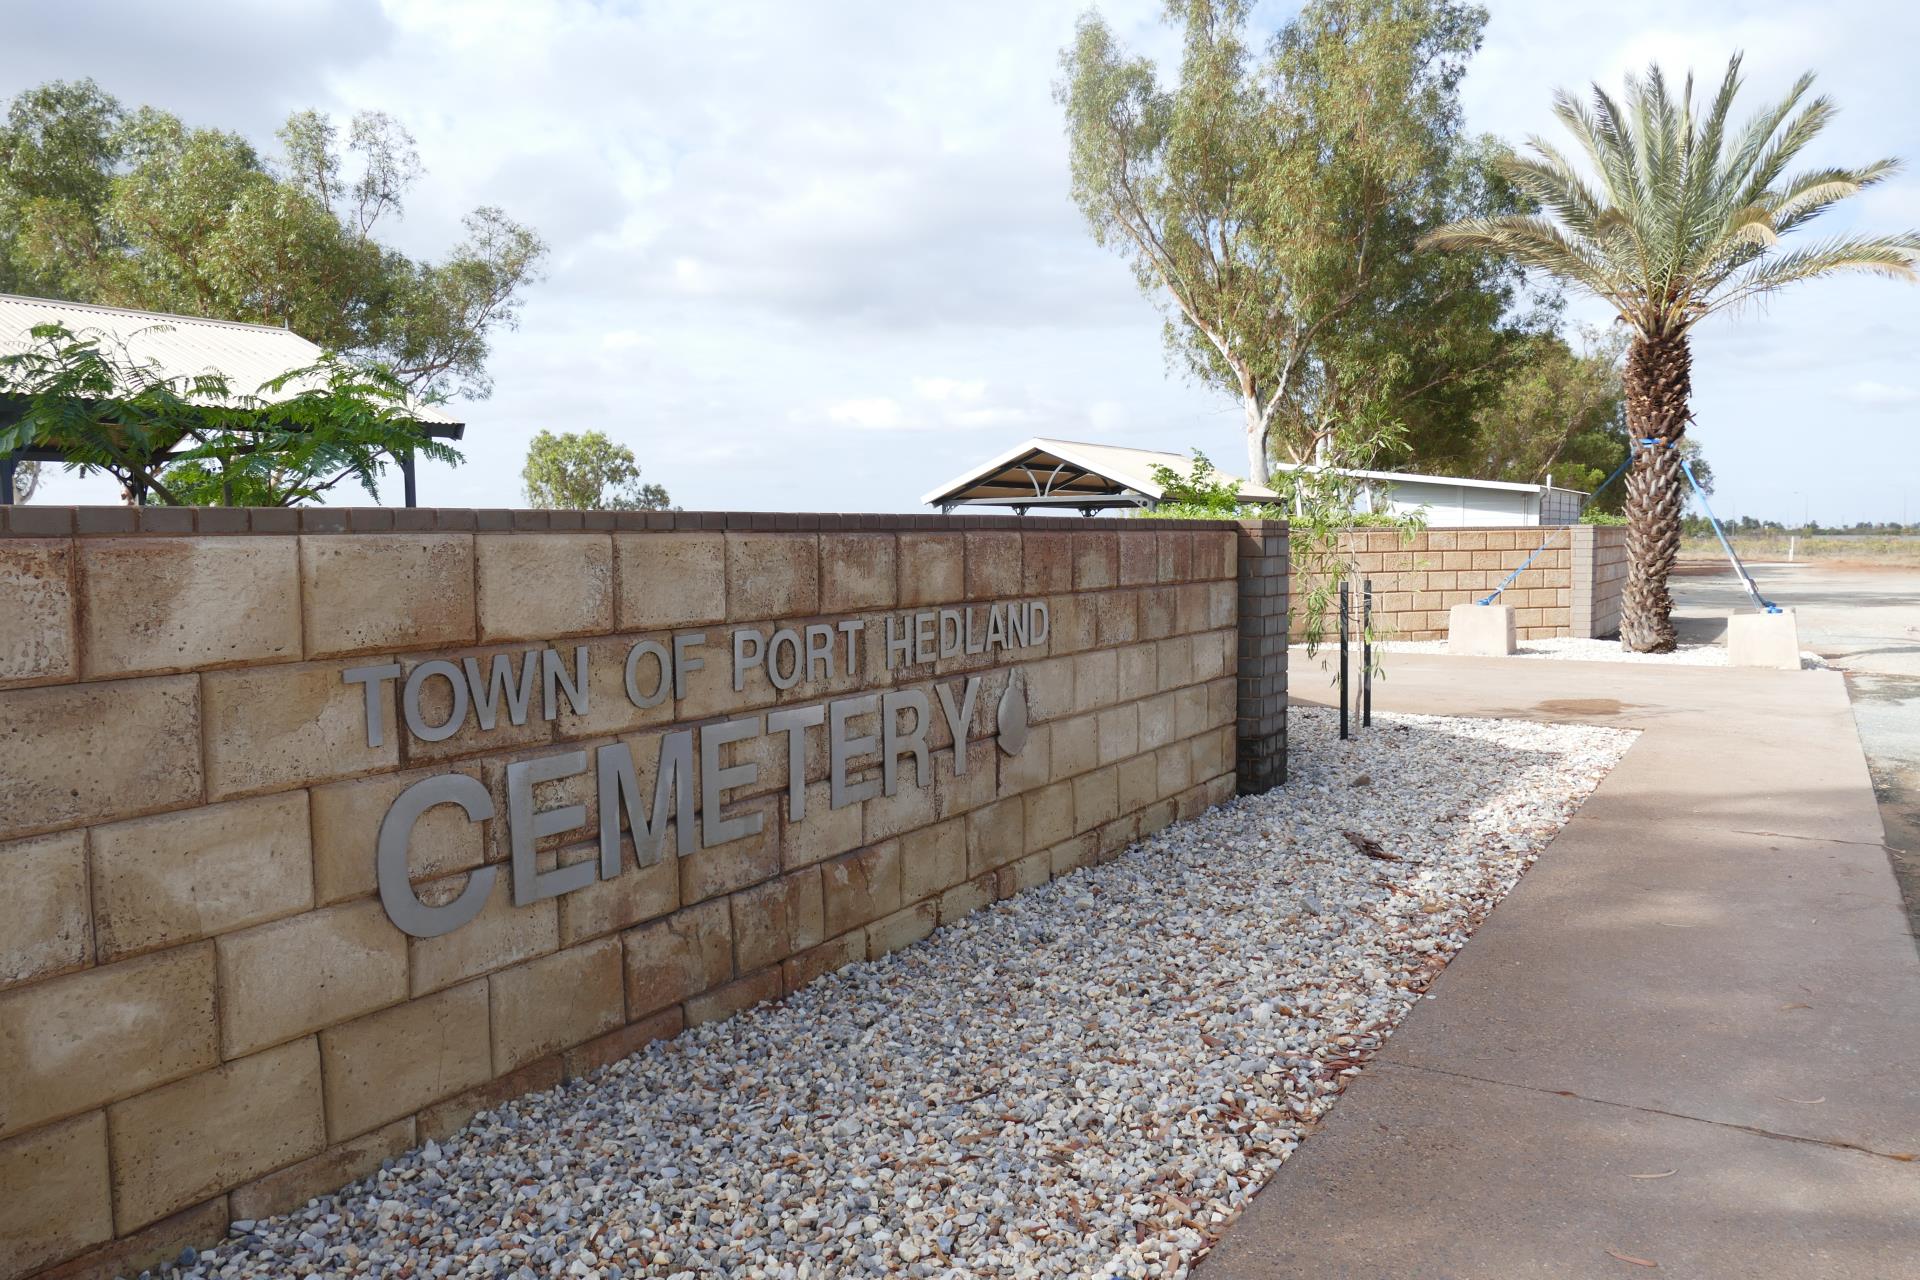 Completion of stage one works at South Hedland Cemetery